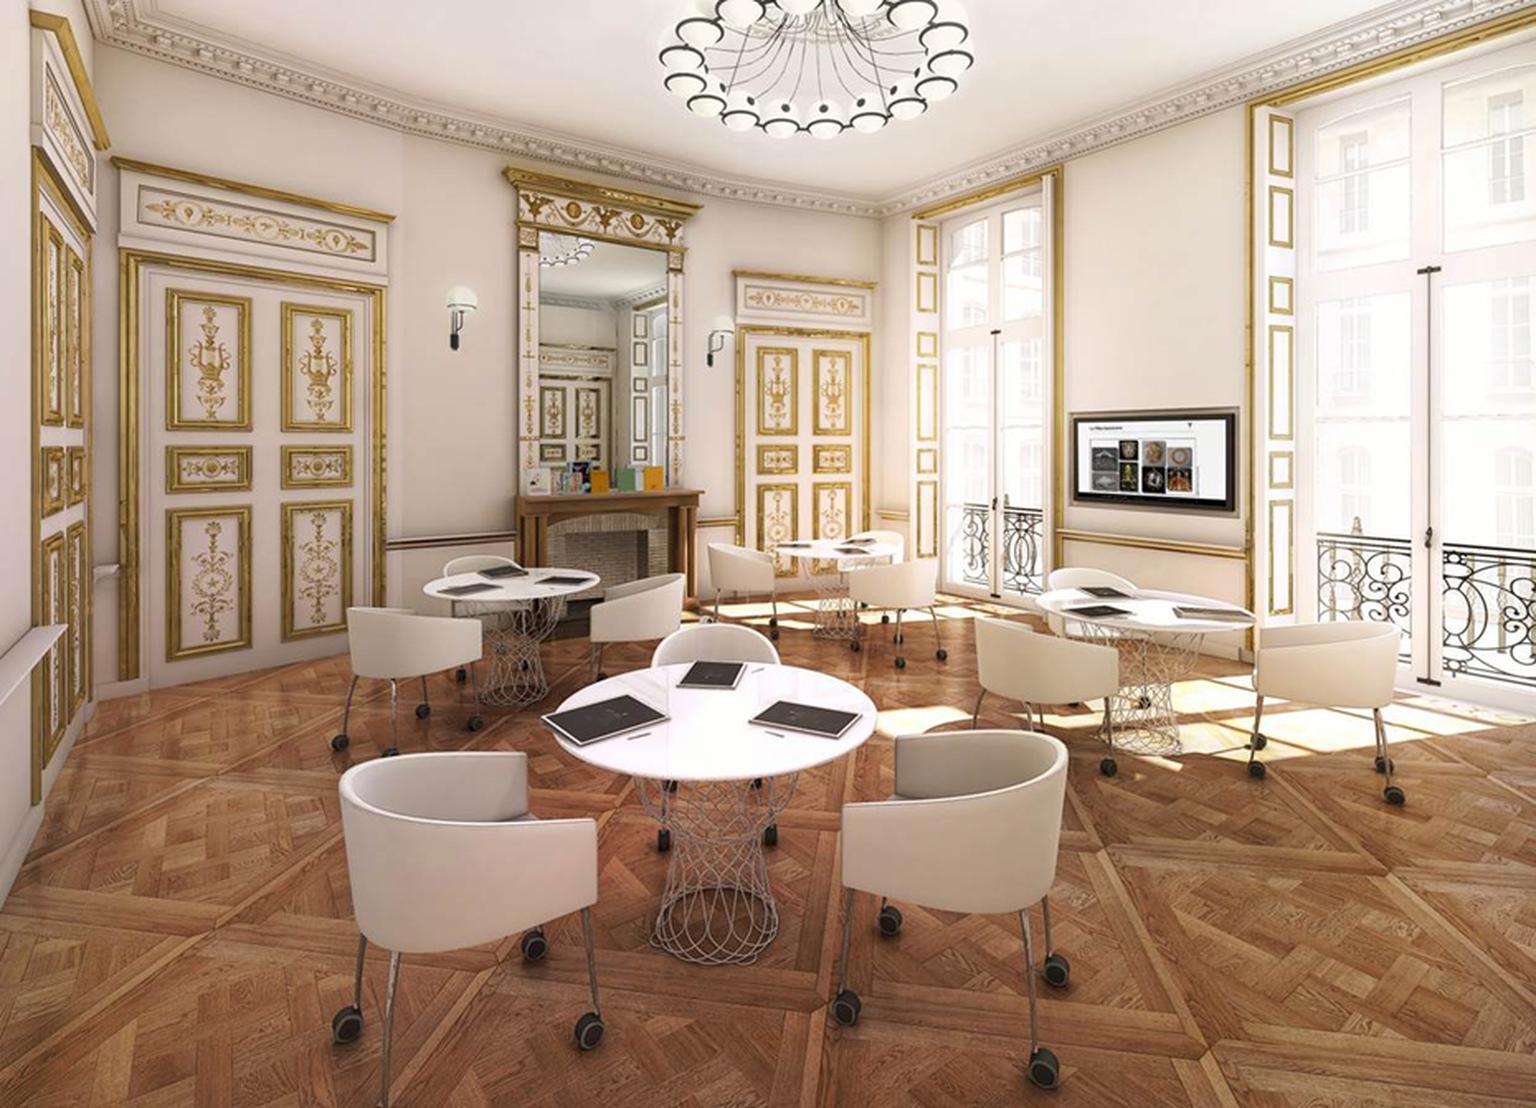 Two classrooms are dedicated to L'École Van Cleef & Arpels History of Art classes, with one of them housed in an 18th century salon. © Studios d’architecture Ory & Associe´s.